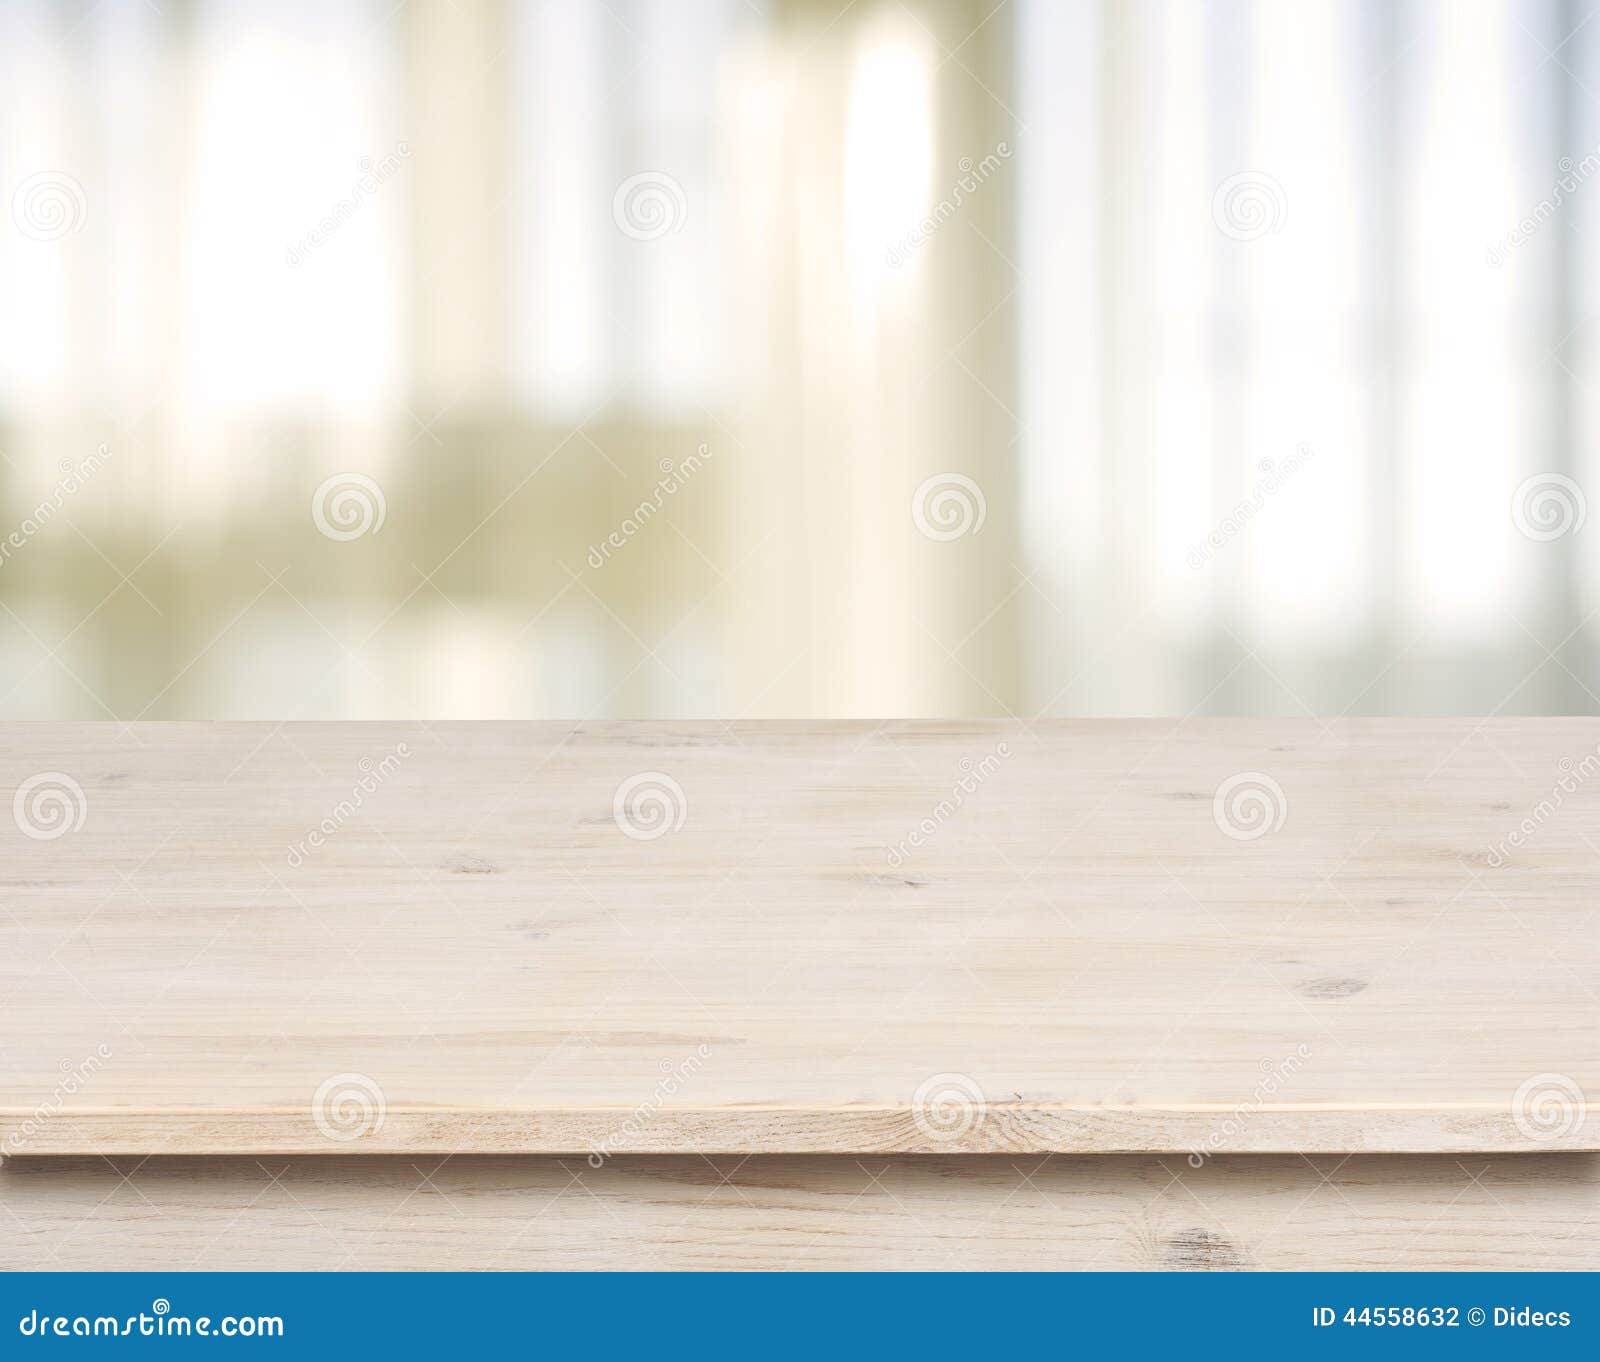 wooden table on defocuced window with curtain background